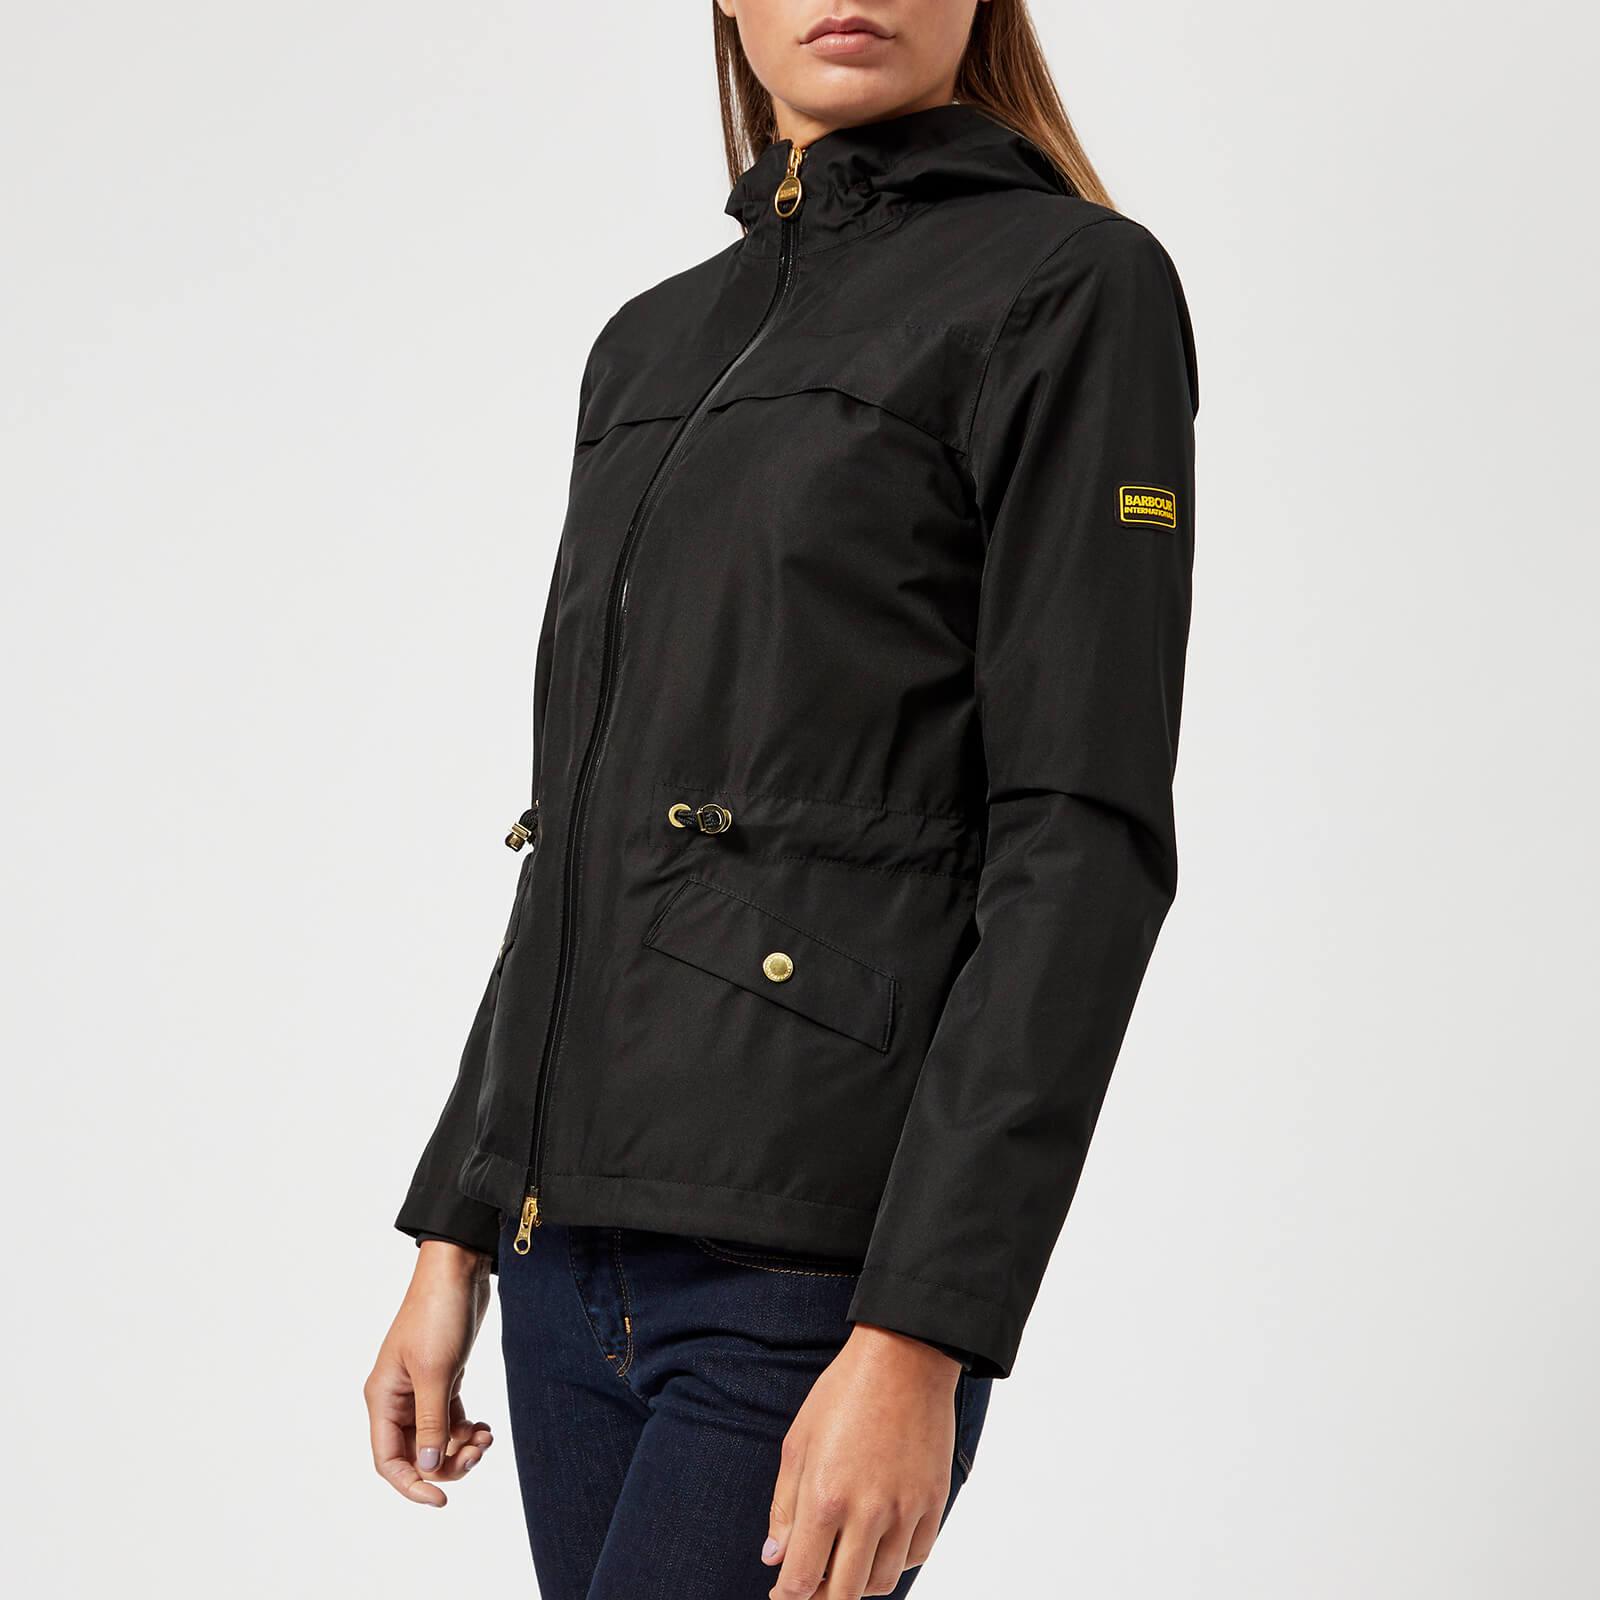 Barbour Synthetic Misano Jacket in 